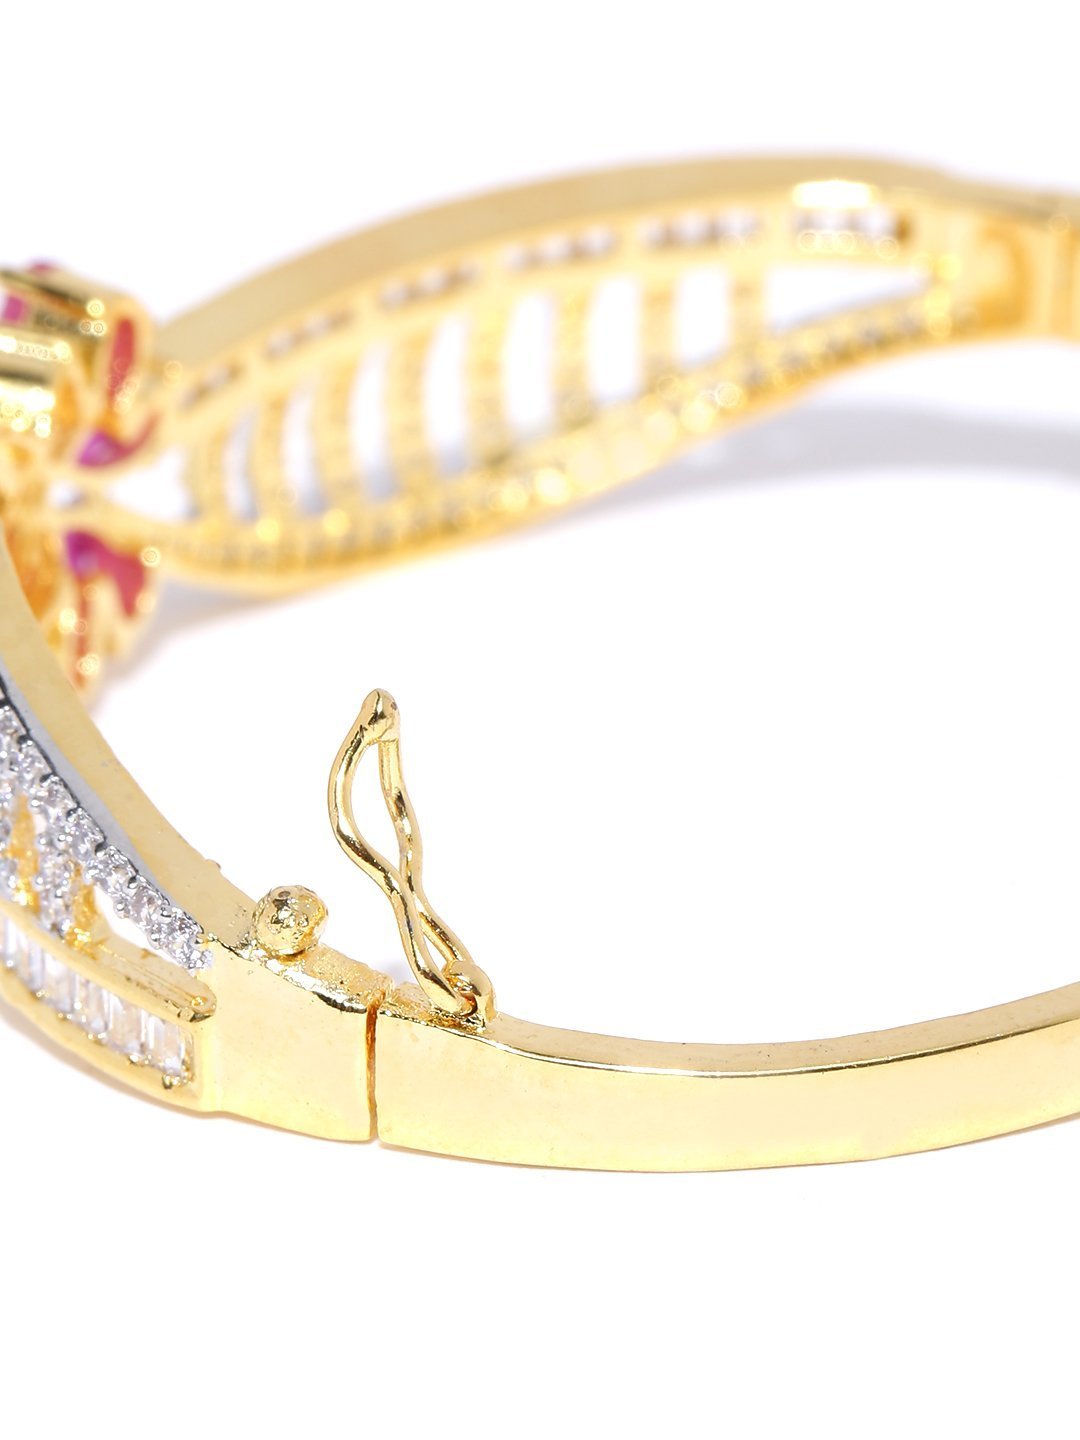 Women's Gold-Plated American Diamond and Ruby Studded Floral Patterned Bracelet in Pink Color - Priyaasi